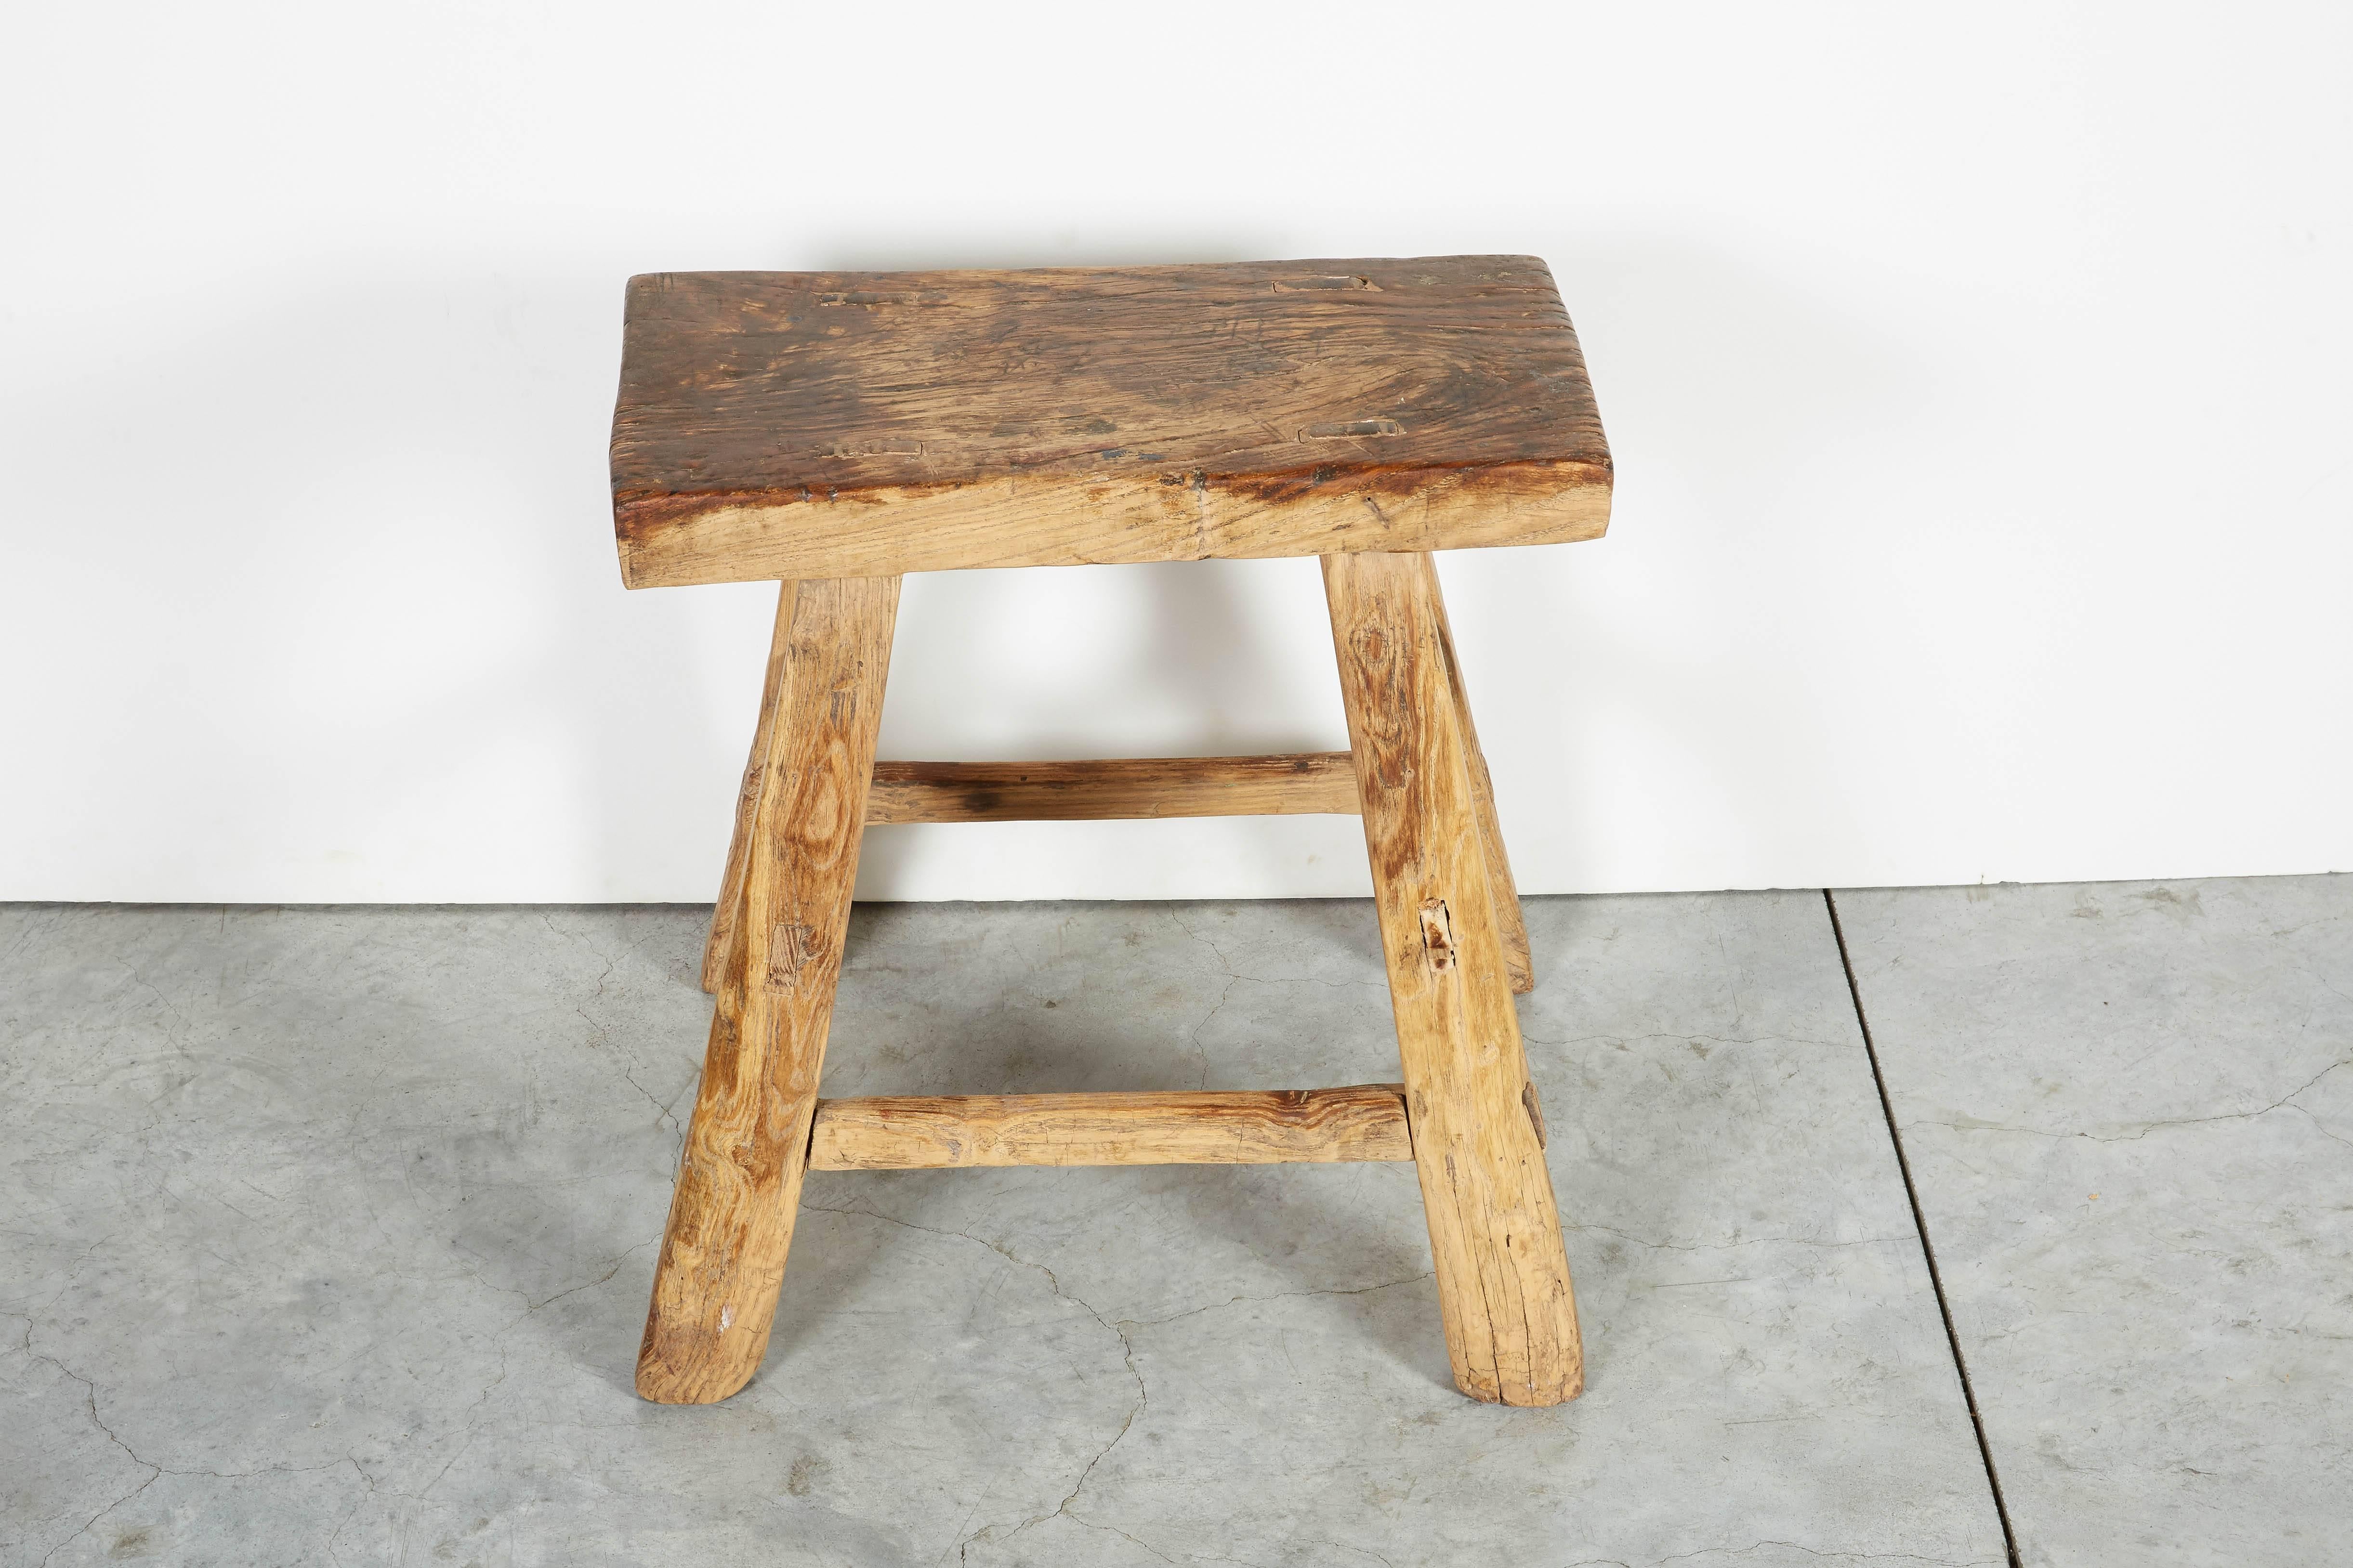 A beautiful, classically shaped, antique mortised Chinese elm stool displaying great wear. Lovely and useful in any space. From Shanxi Province.
S521